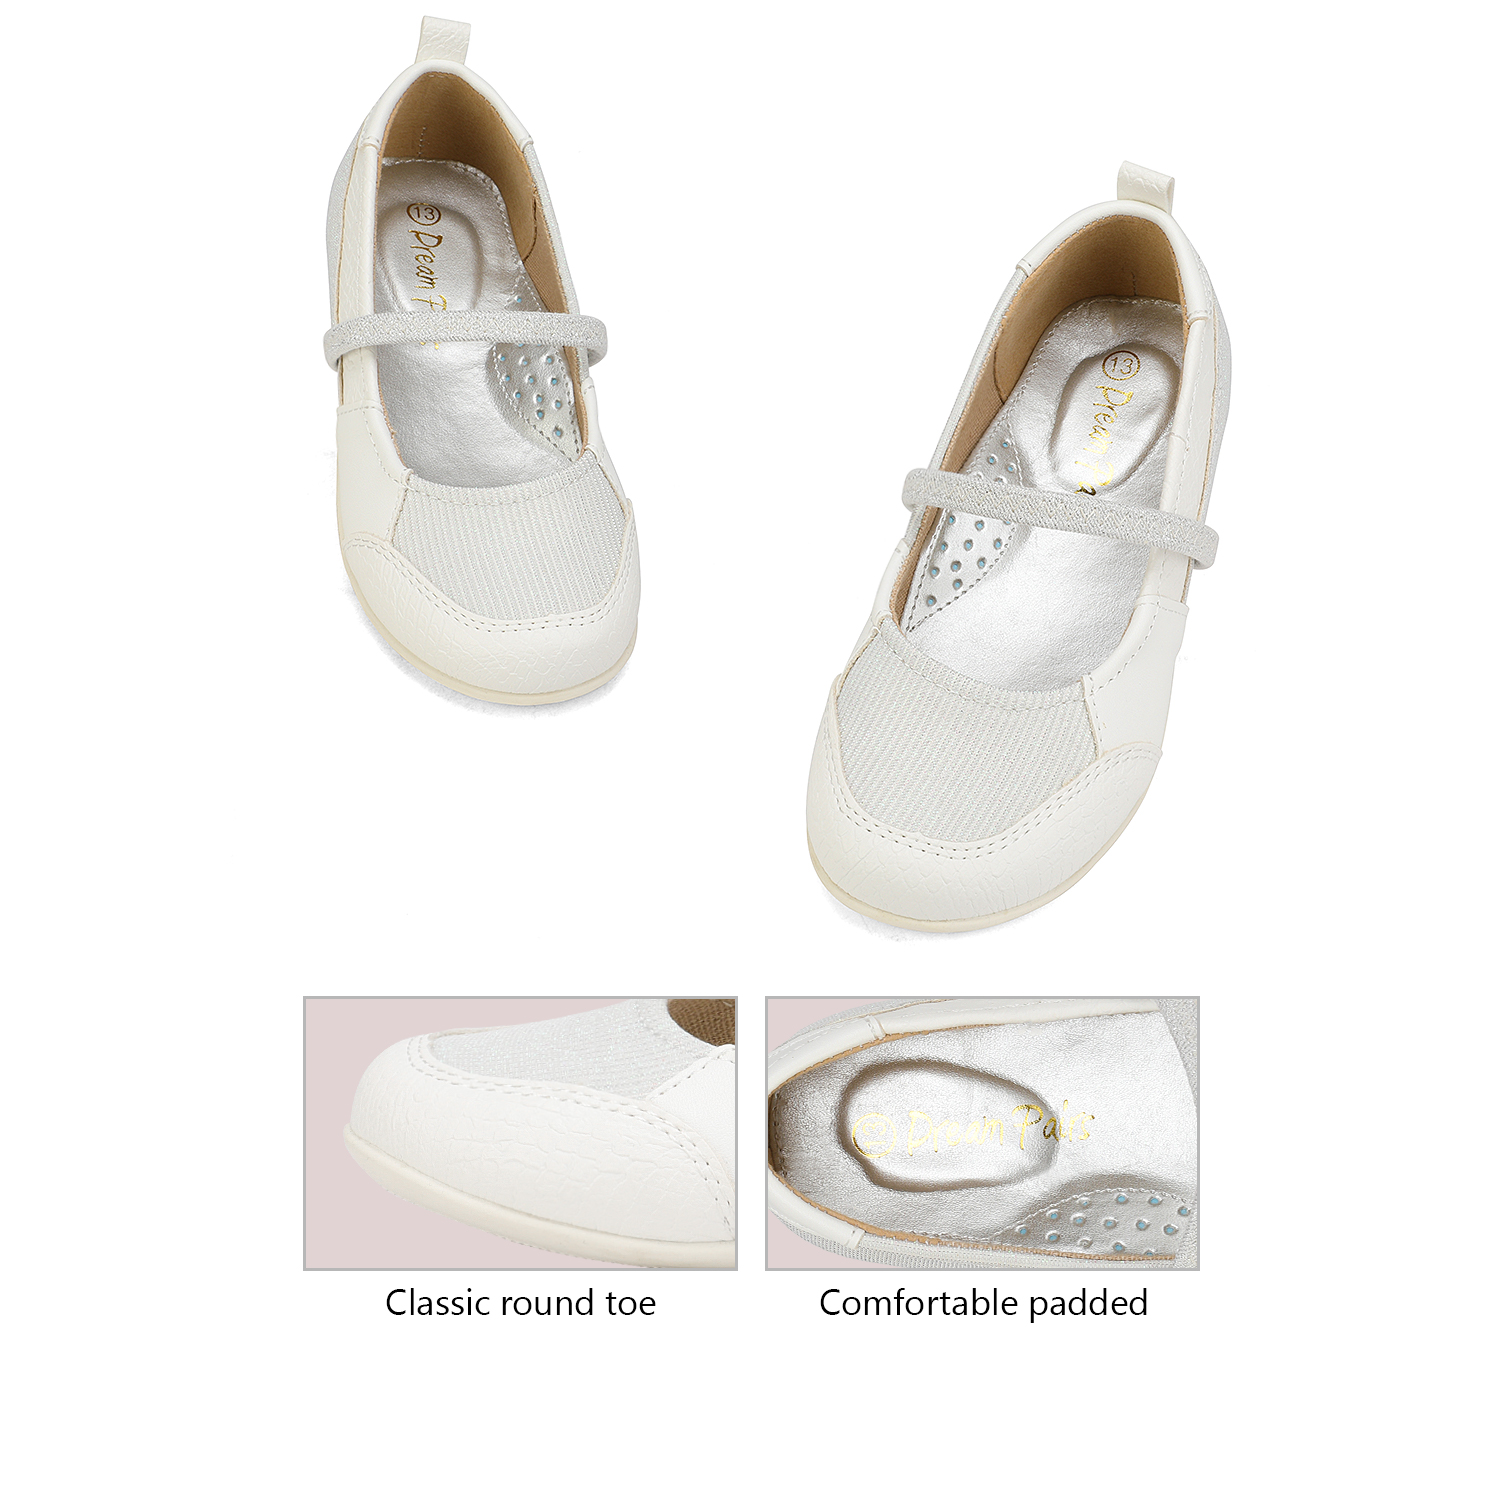 Dream Pairs Girls Mary Jane Flats Shoes Comfort School Casual Shoes Slip On Flat Shoes For Kids SASA-2 WHITE Size 8 - image 4 of 5